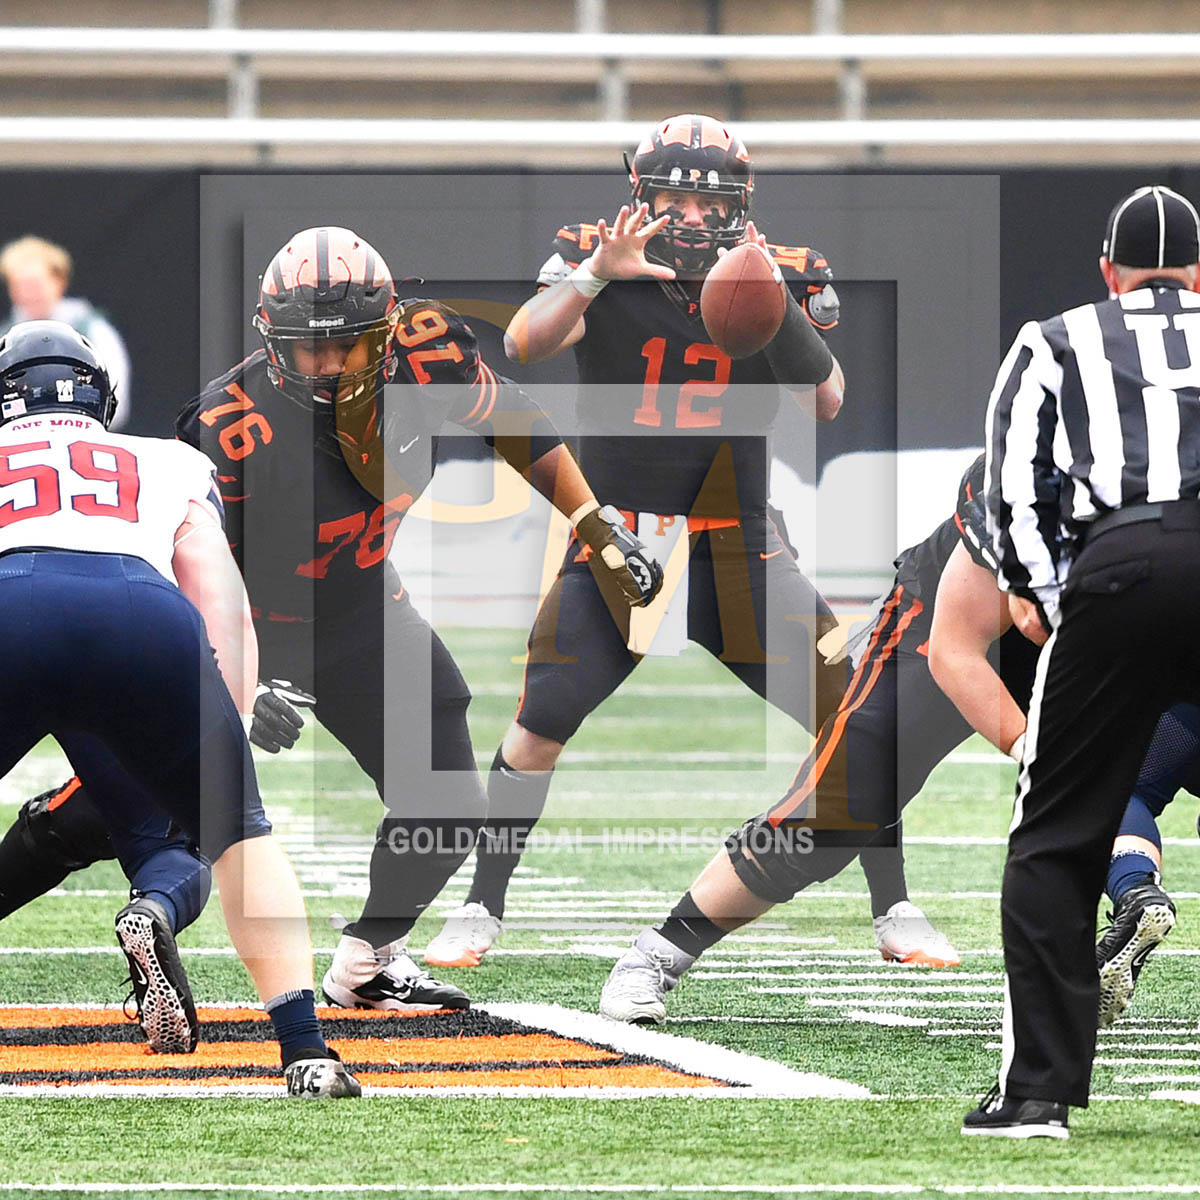 Princeton University star quarterback, JOHN LOVETT, takes the ball in the first quarter against Penn. LOVETT led his team to ther first undefeated season in 54 years, defeating Penn 42-14.